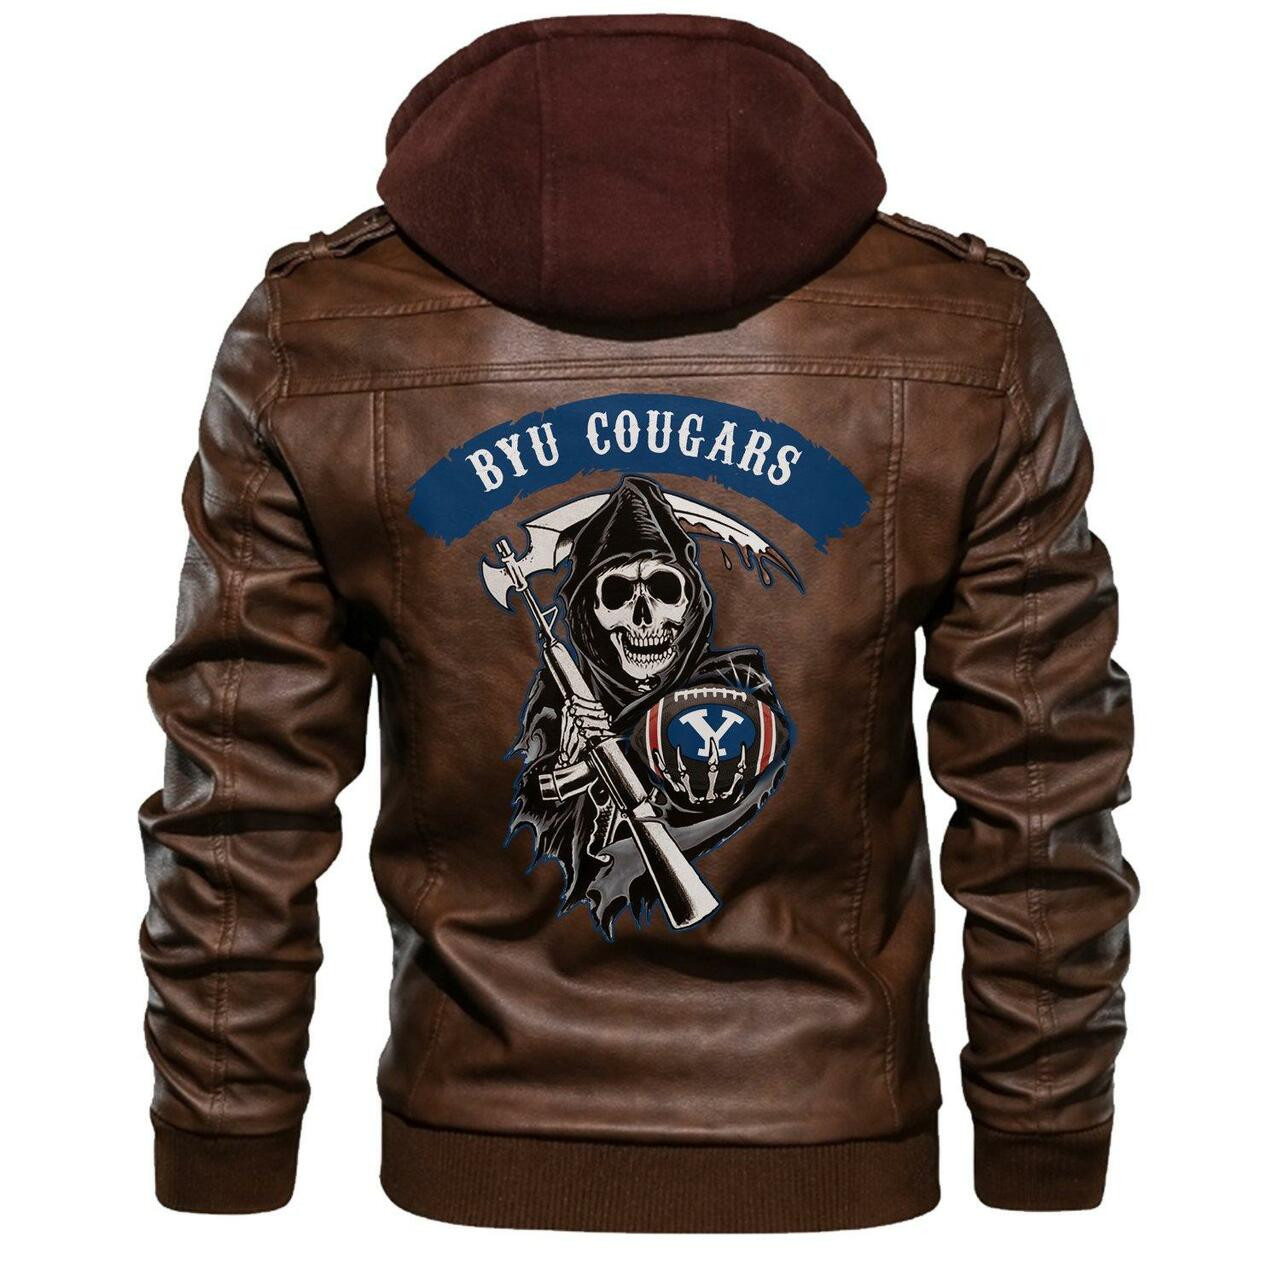 Top leather jacket can keep you warm on cooler days 141